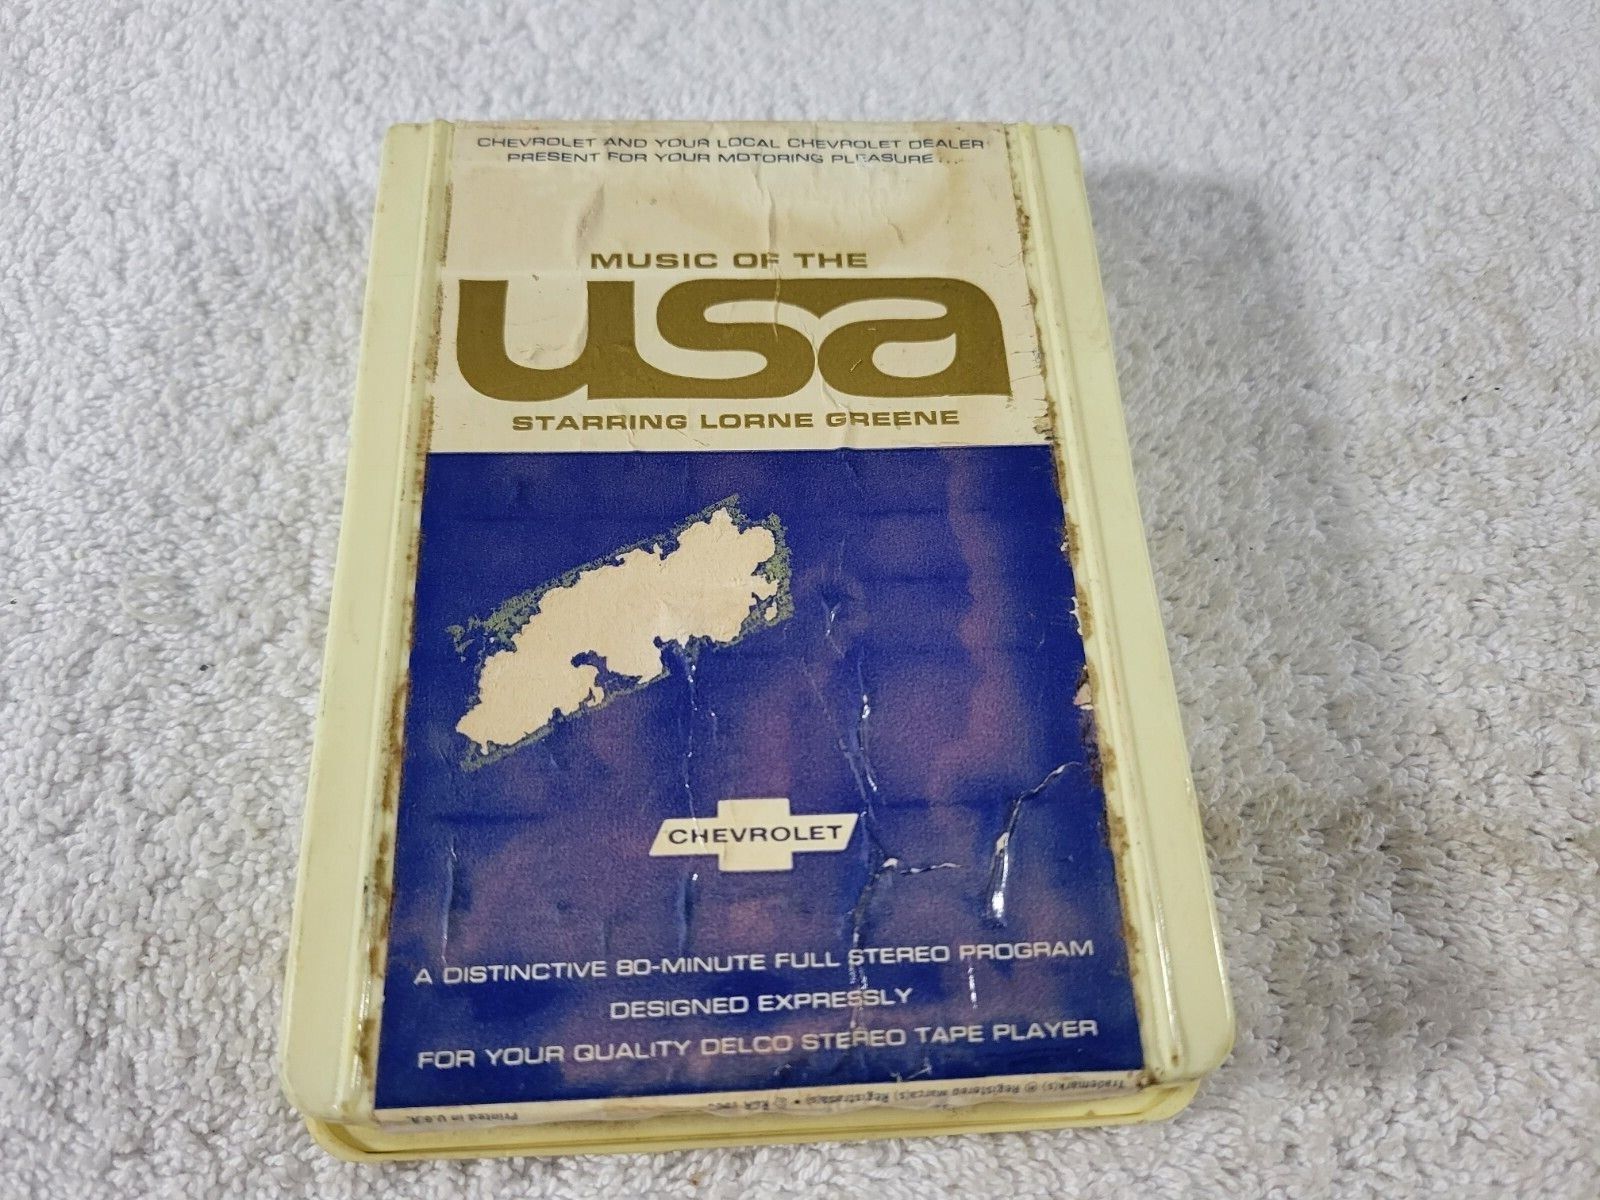 1967 Chevrolet- Music Of The USA PC8S-501 8-Track Tape. Professionally Rebuilt